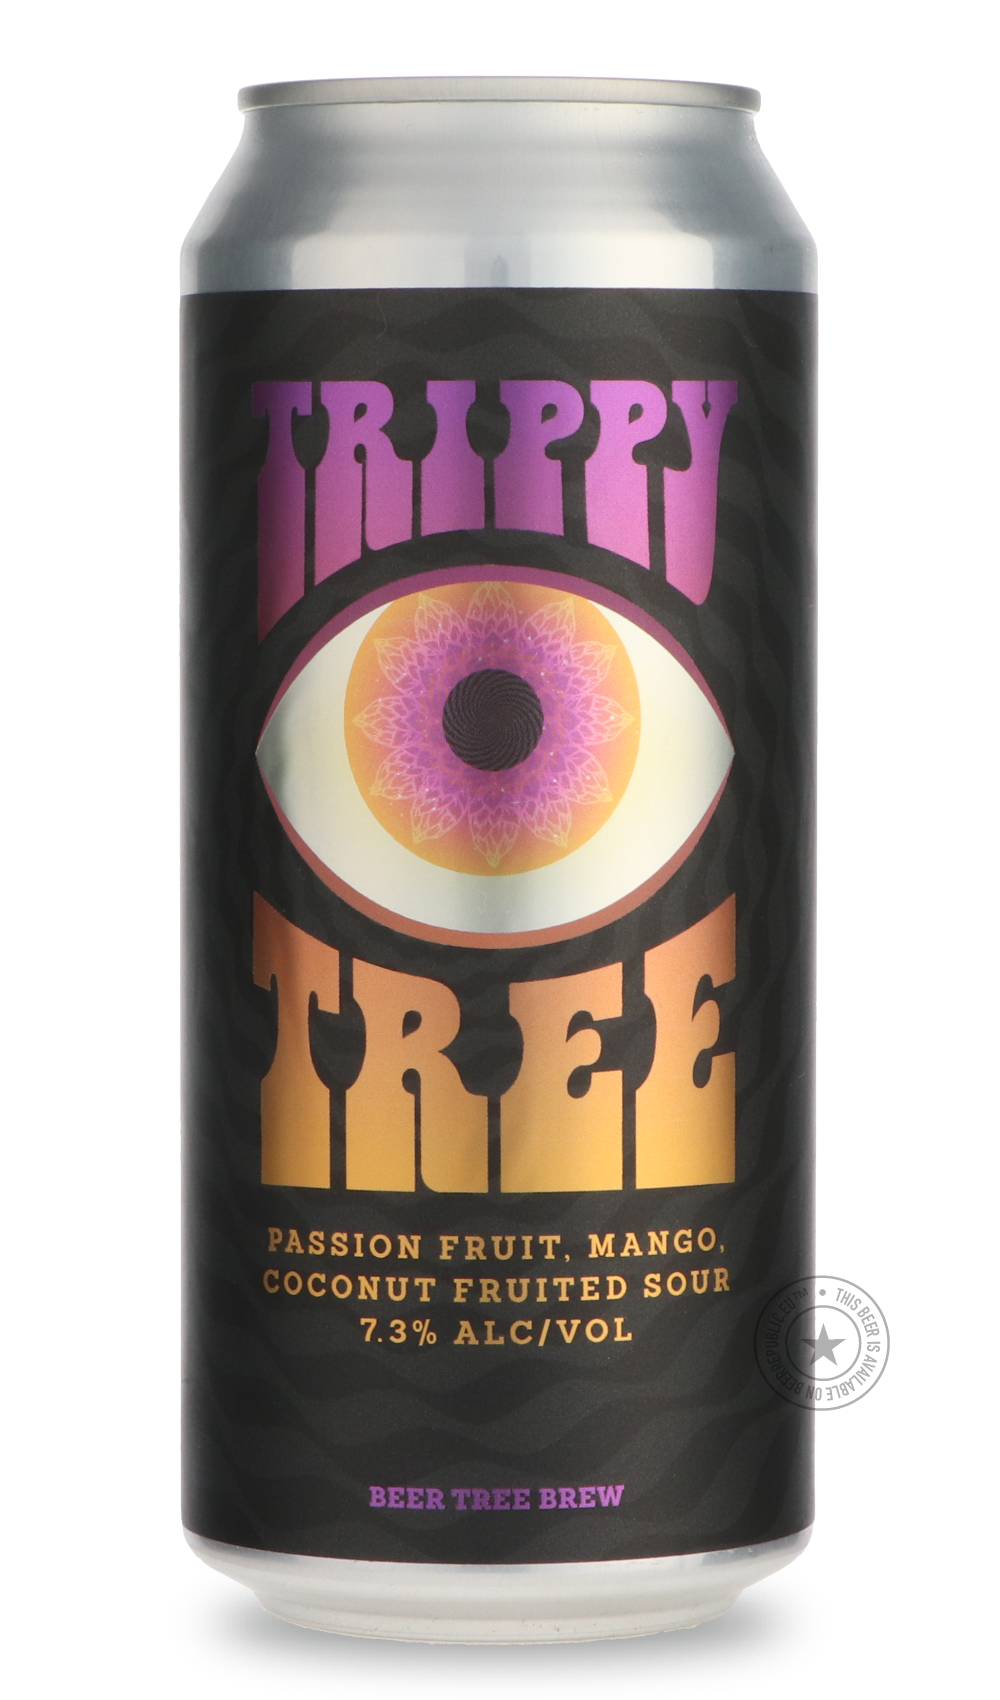 -Beer Tree- Trippy Tree - Passion Fruit, Mango, Coconut-Sour / Wild & Fruity- Only @ Beer Republic - The best online beer store for American & Canadian craft beer - Buy beer online from the USA and Canada - Bier online kopen - Amerikaans bier kopen - Craft beer store - Craft beer kopen - Amerikanisch bier kaufen - Bier online kaufen - Acheter biere online - IPA - Stout - Porter - New England IPA - Hazy IPA - Imperial Stout - Barrel Aged - Barrel Aged Imperial Stout - Brown - Dark beer - Blond - Blonde - Pil